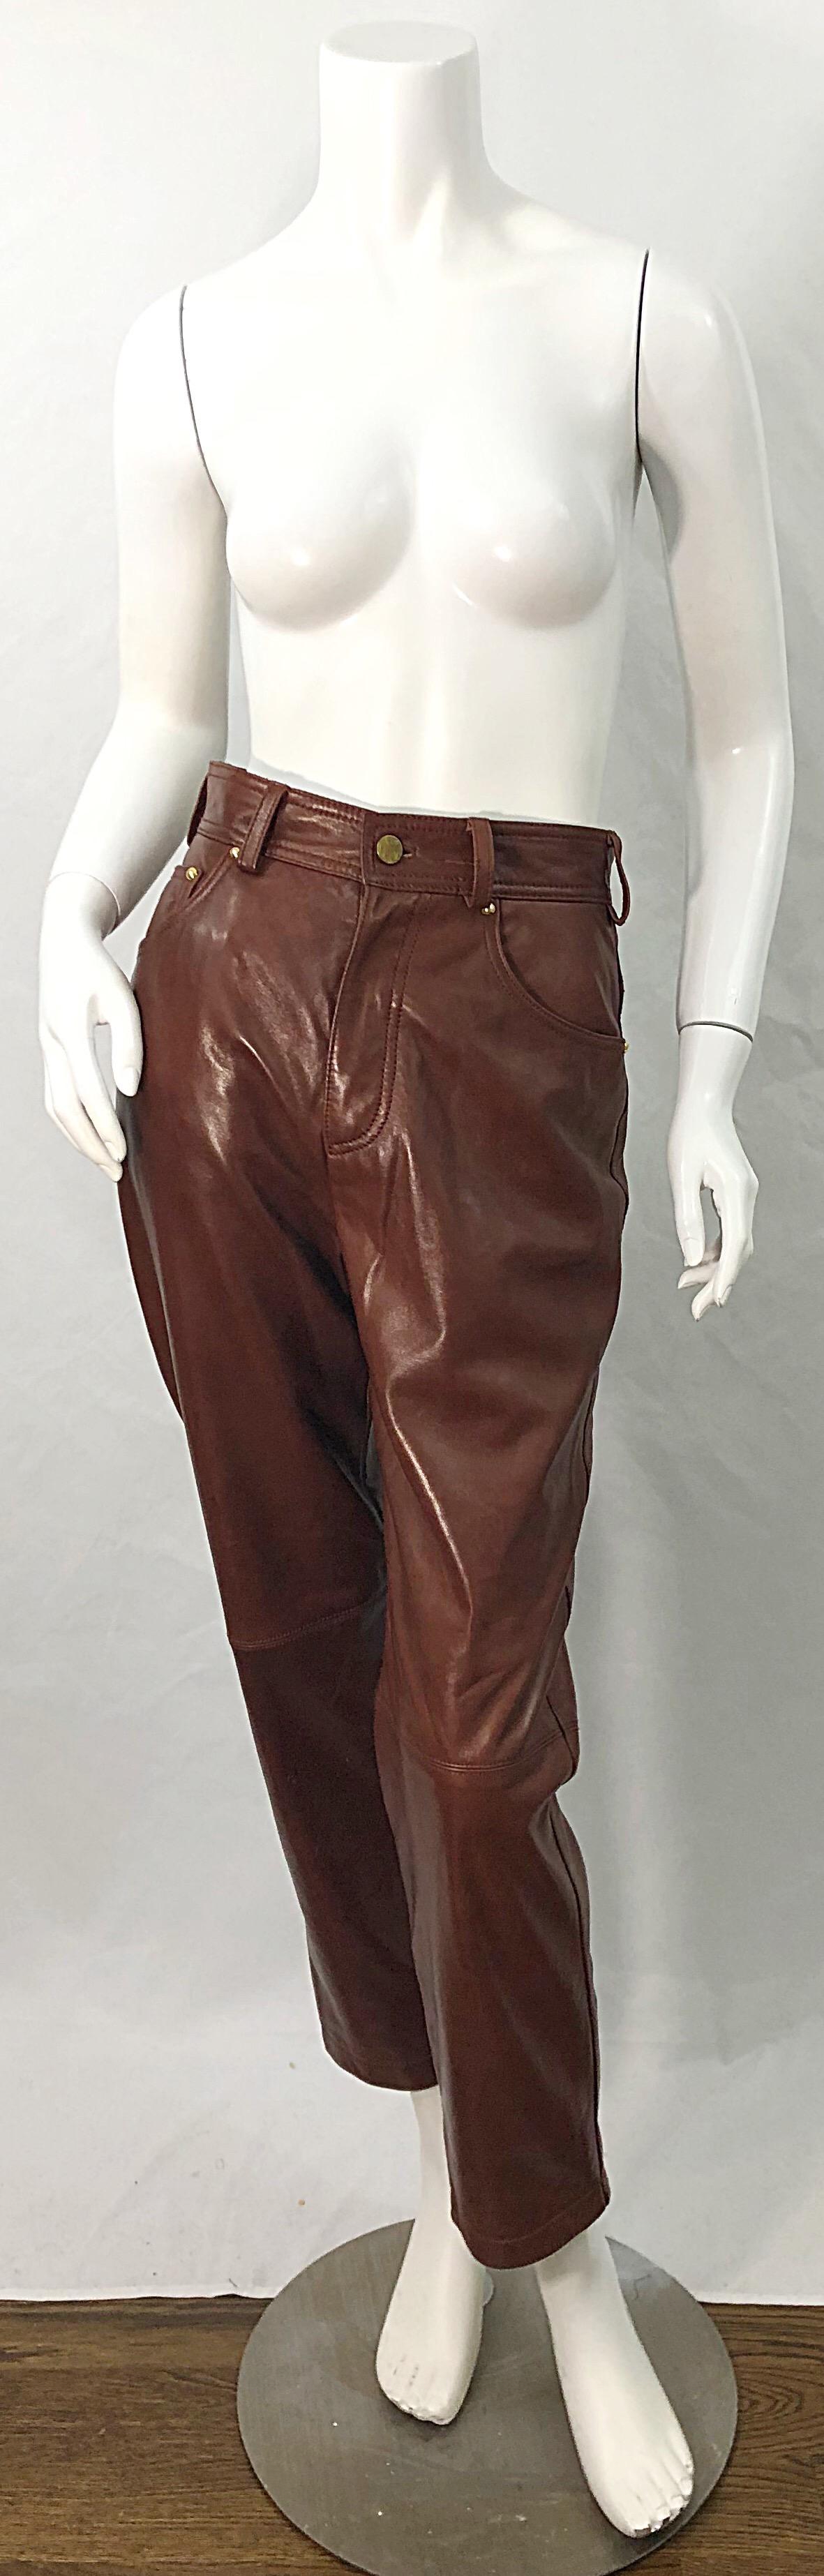 Stylish 90s vintage ESCADA by MARGARETHA LEY caramel brown buttery soft high waisted leather pants / trousers ! Features the perfect color brown that literally matches everything. Button at waist with hidden interior buttons. Zipper fly. Pockets at